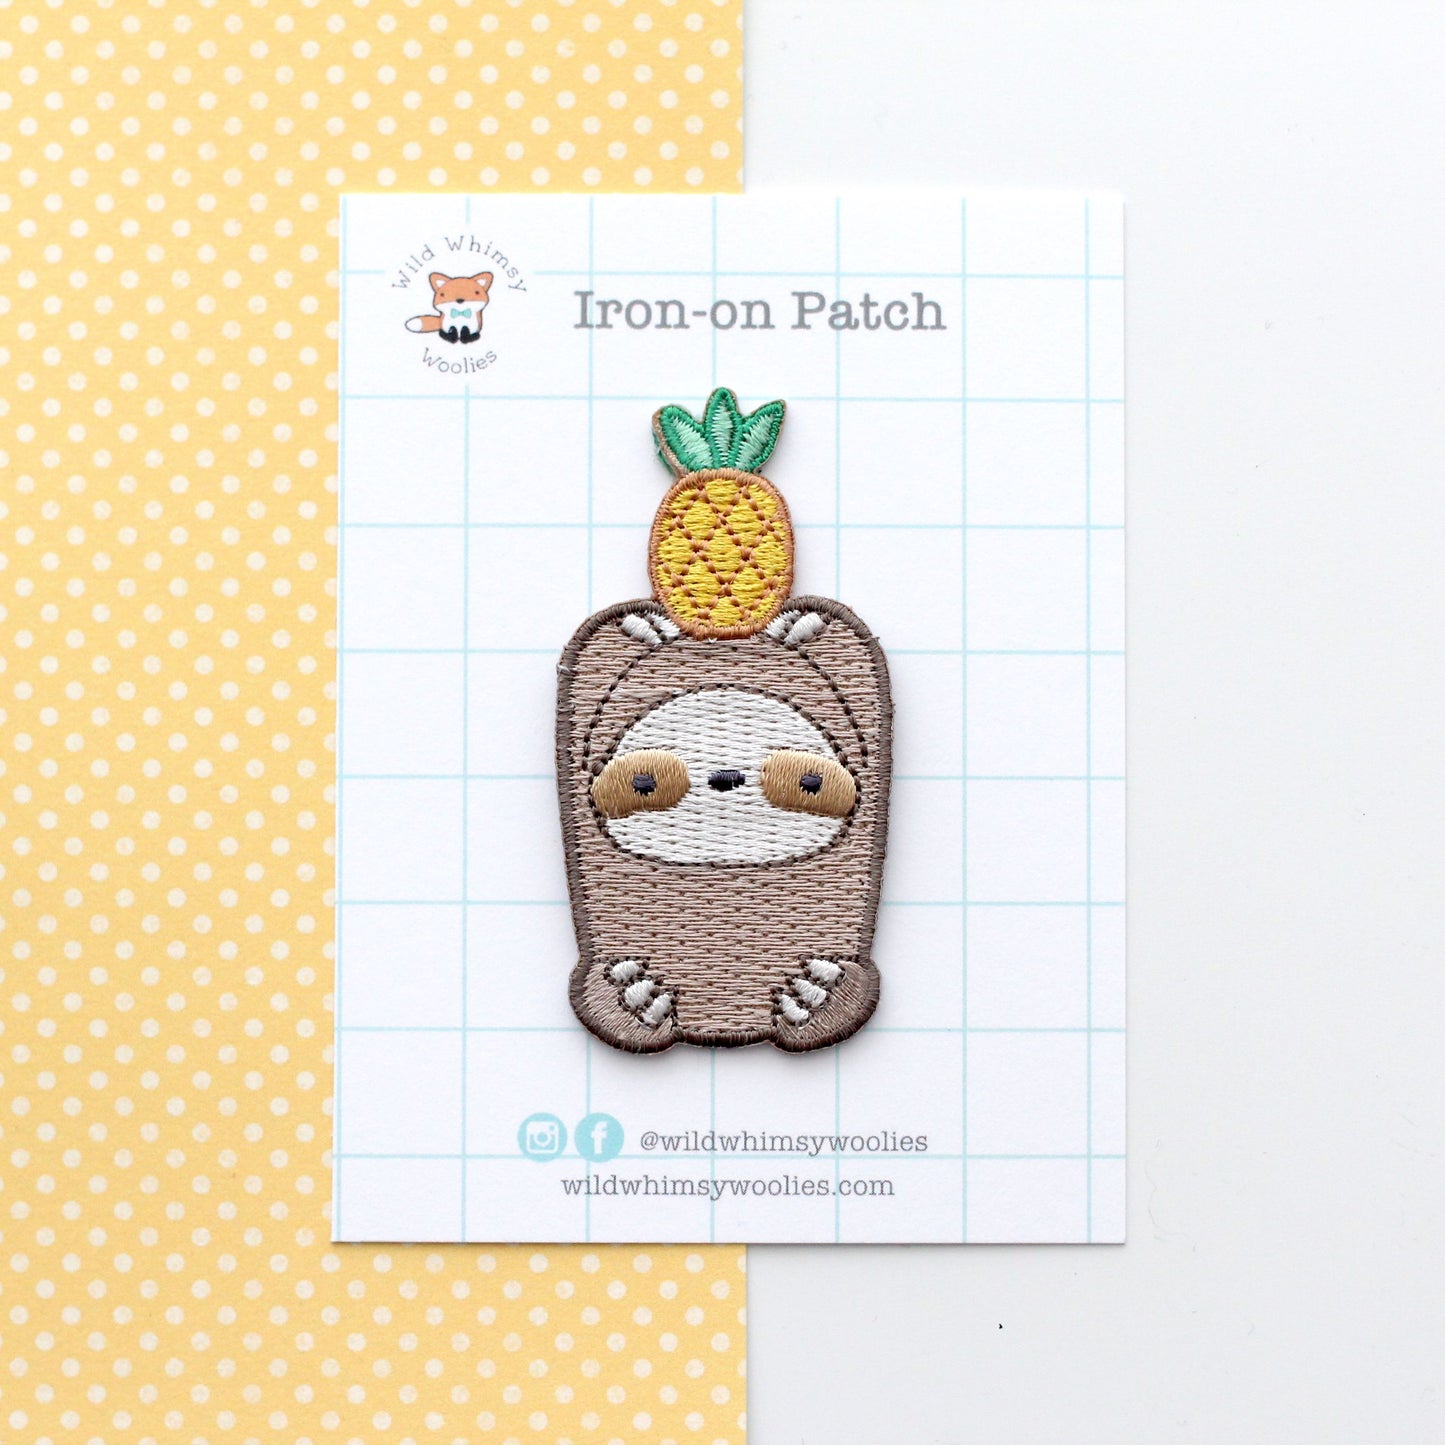 Pineapple Sloth Patches - Sloth Applique Patches